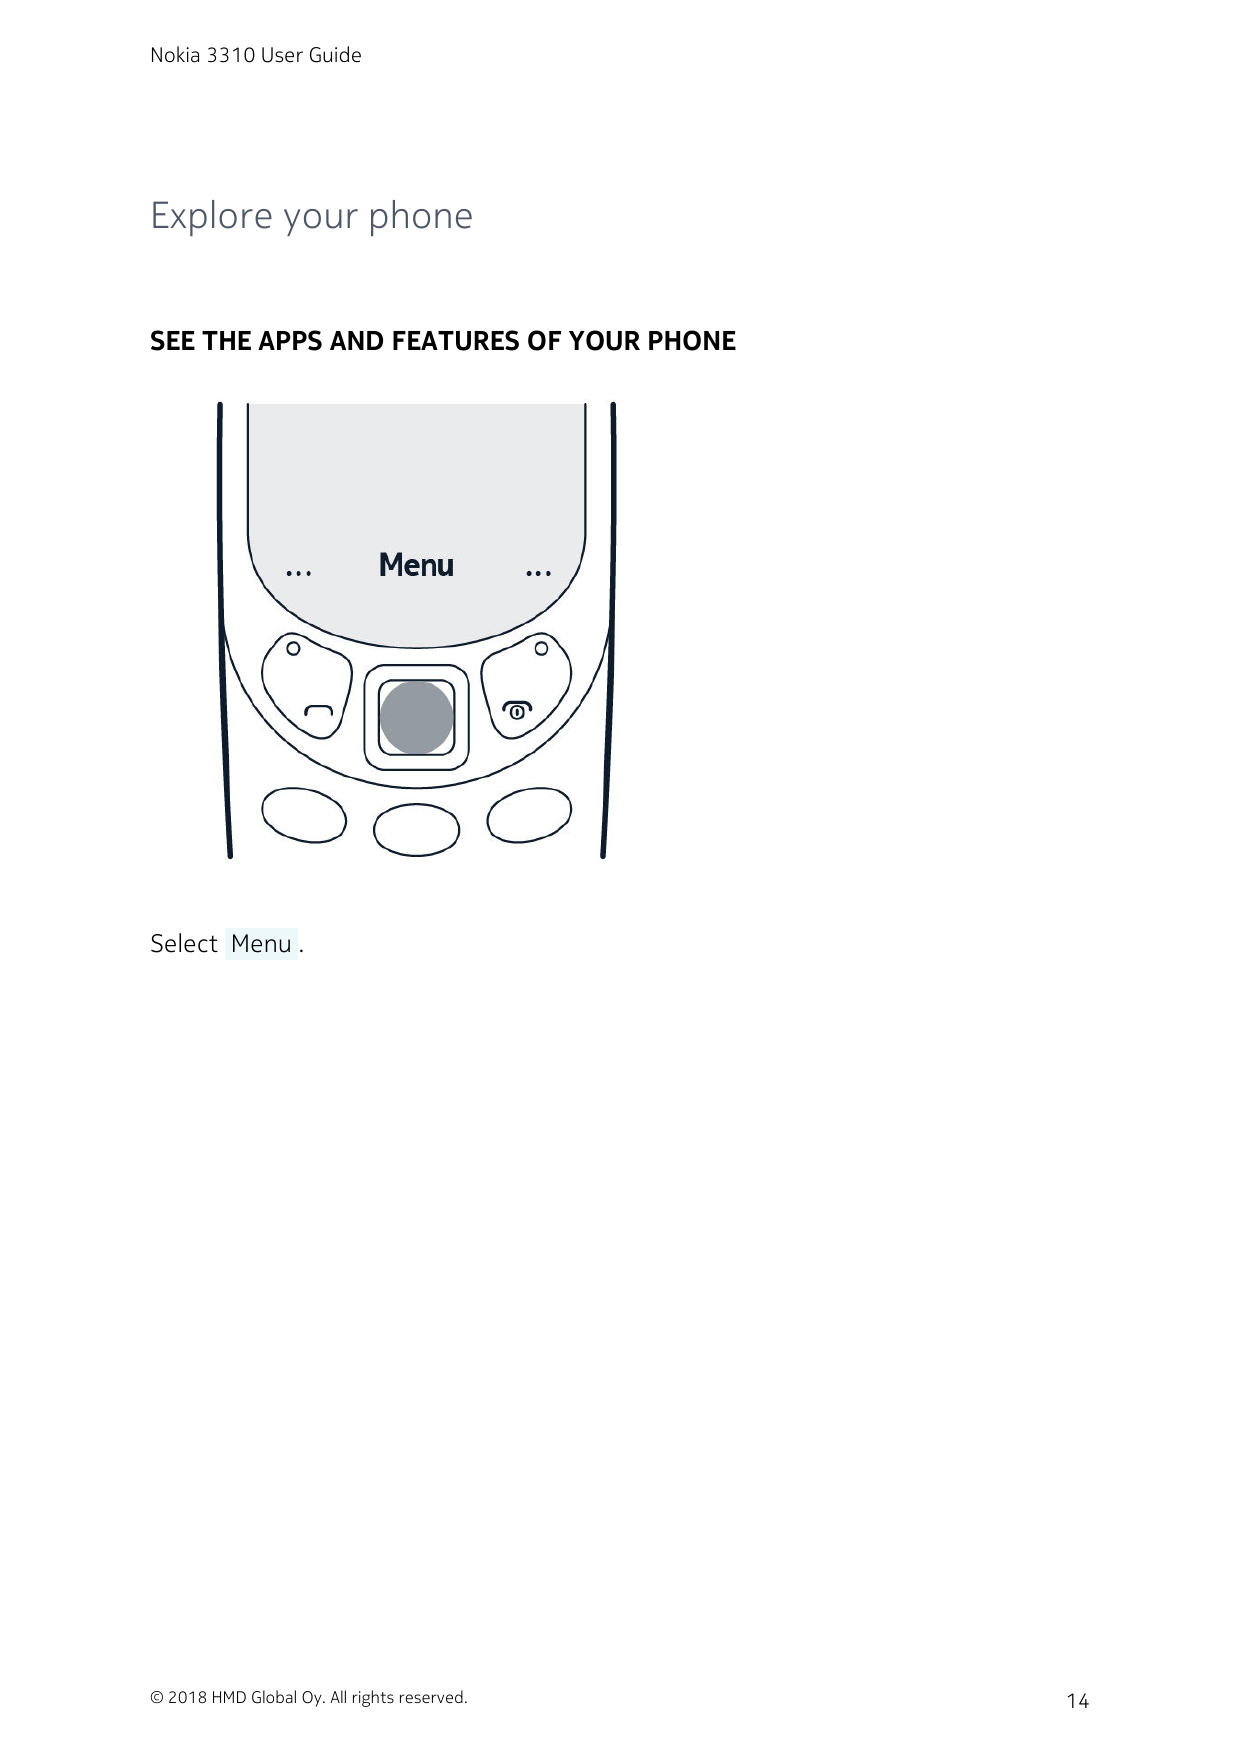 Nokia 3310 User GuideExplore your phoneSEE THE APPS AND FEATURES OF YOUR PHONESelect  Menu .© 2018 HMD Global Oy. All rights res